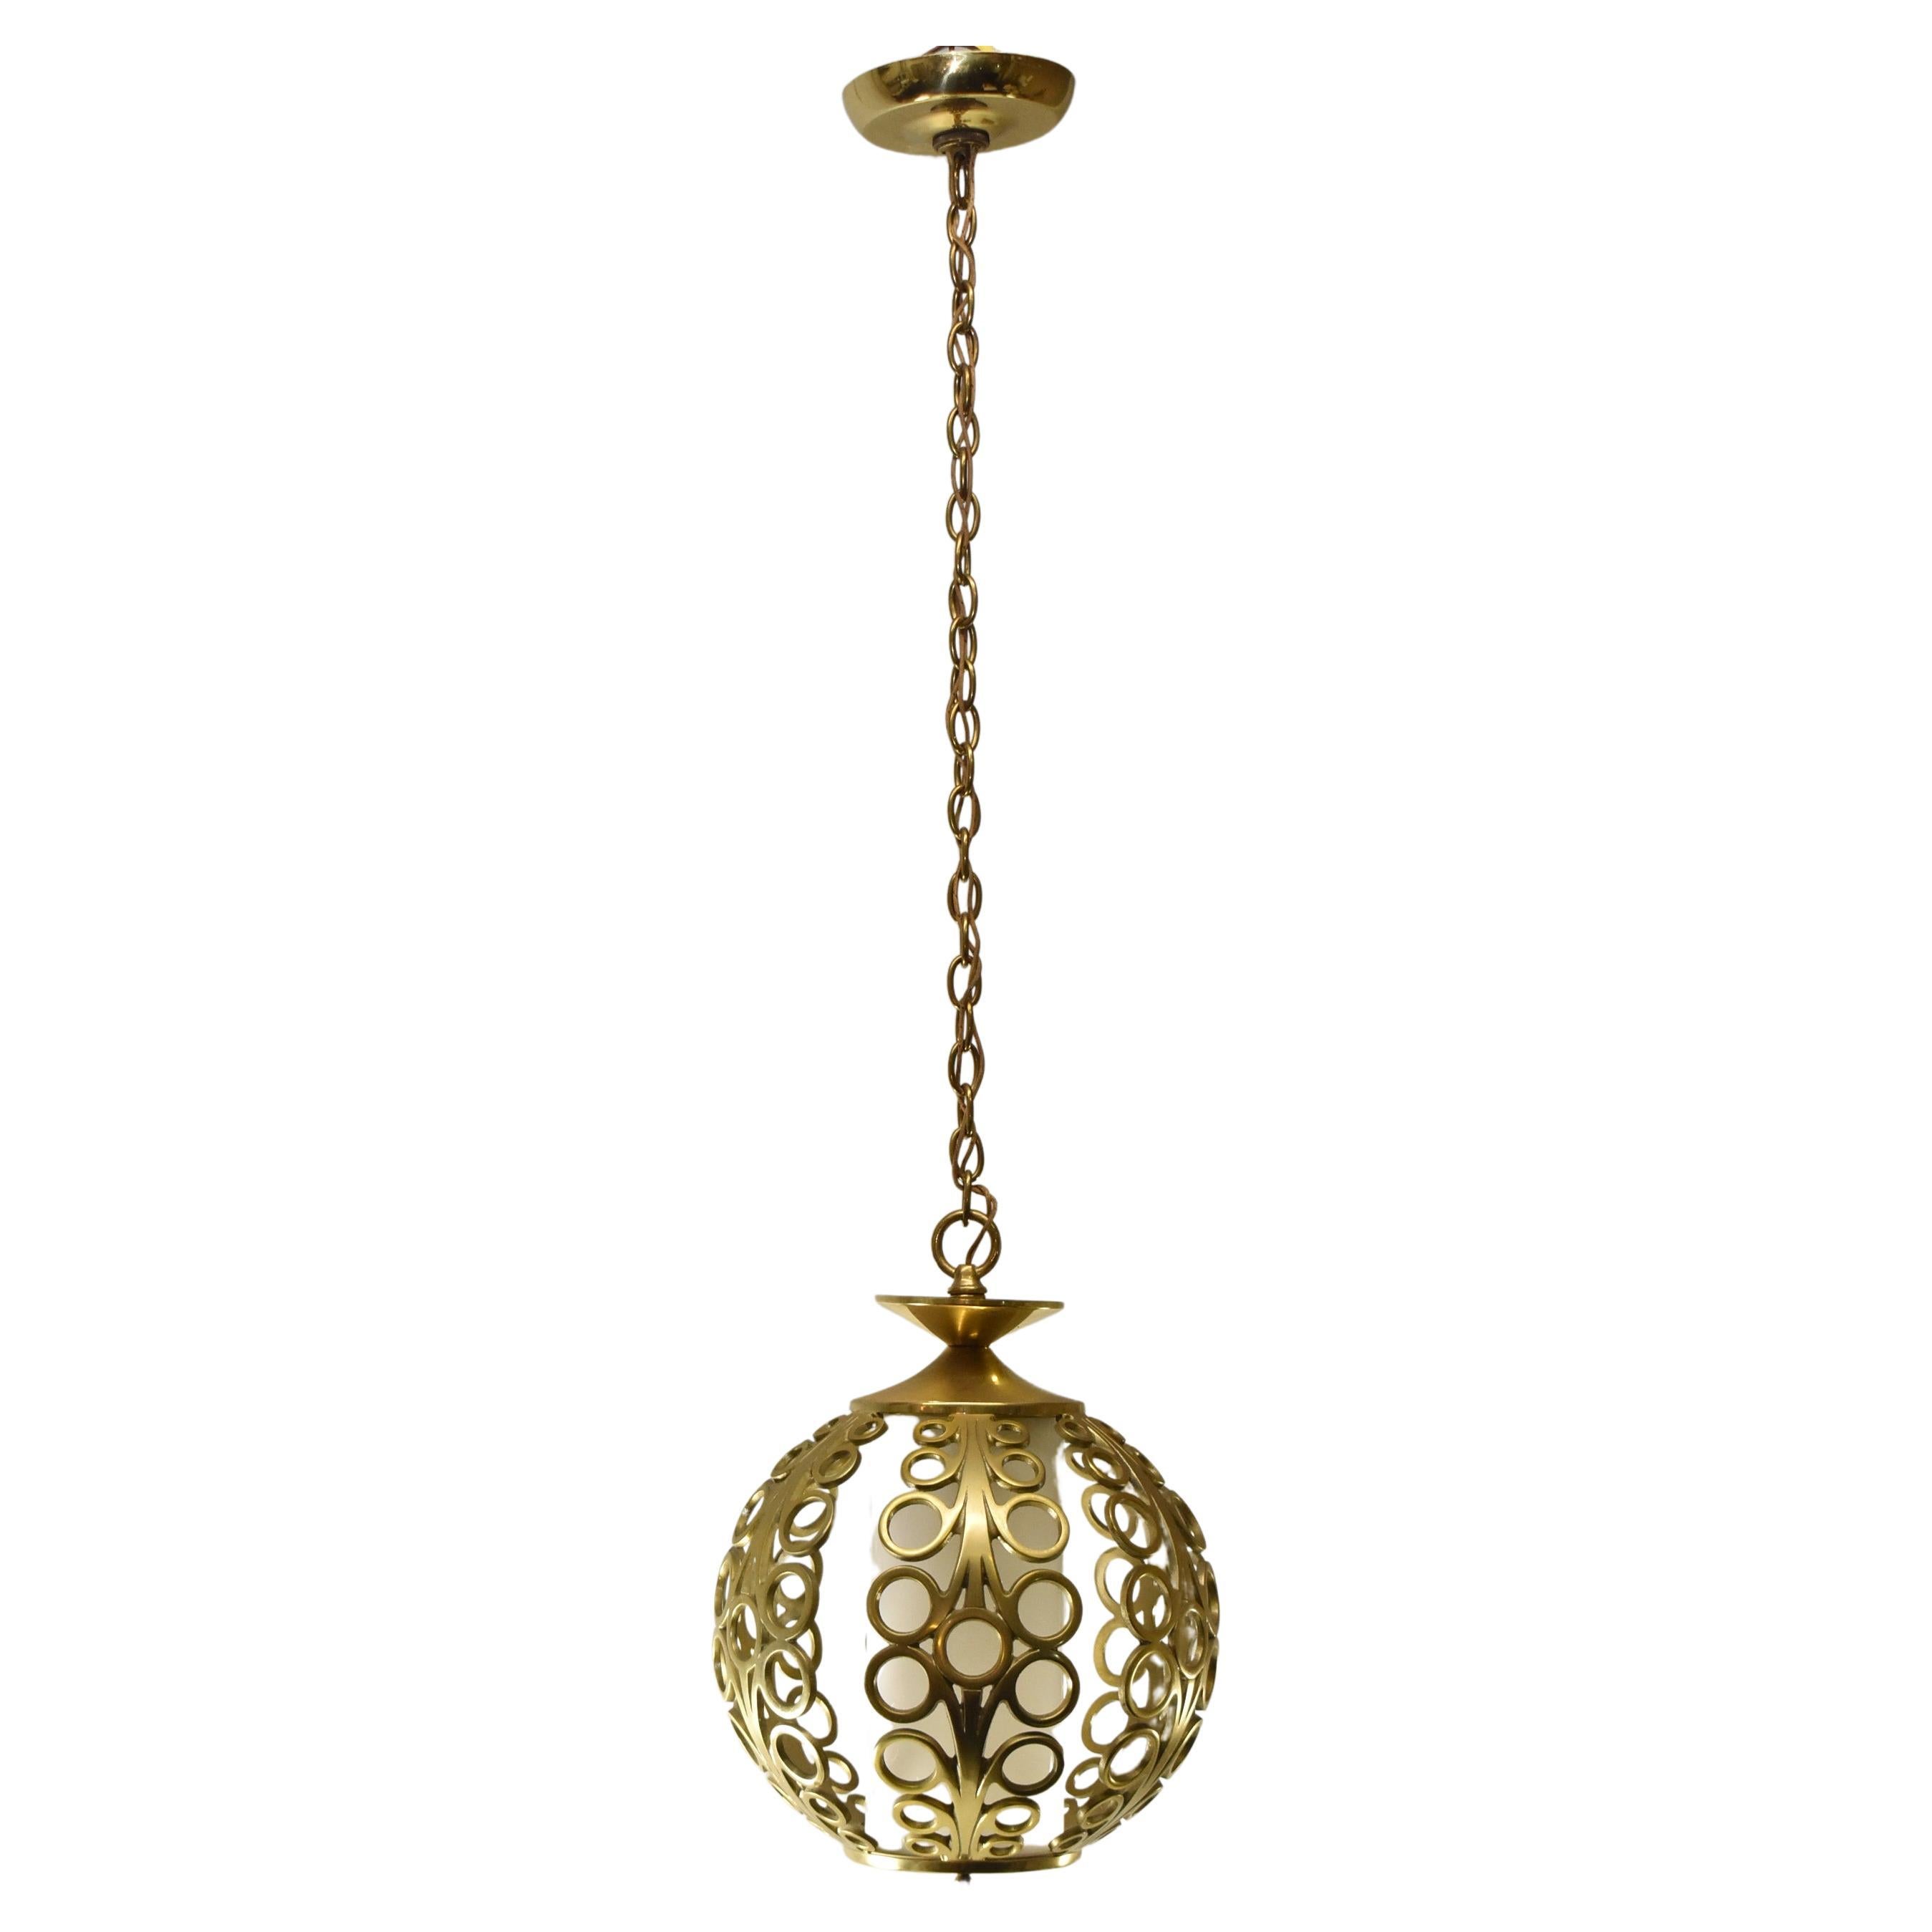 Vintage Modern Hollywood Regency Brass Round Chandelier Suspension with open work design, single socket with opaque white diffuser shade. Le pendentif mesure 11 1/2